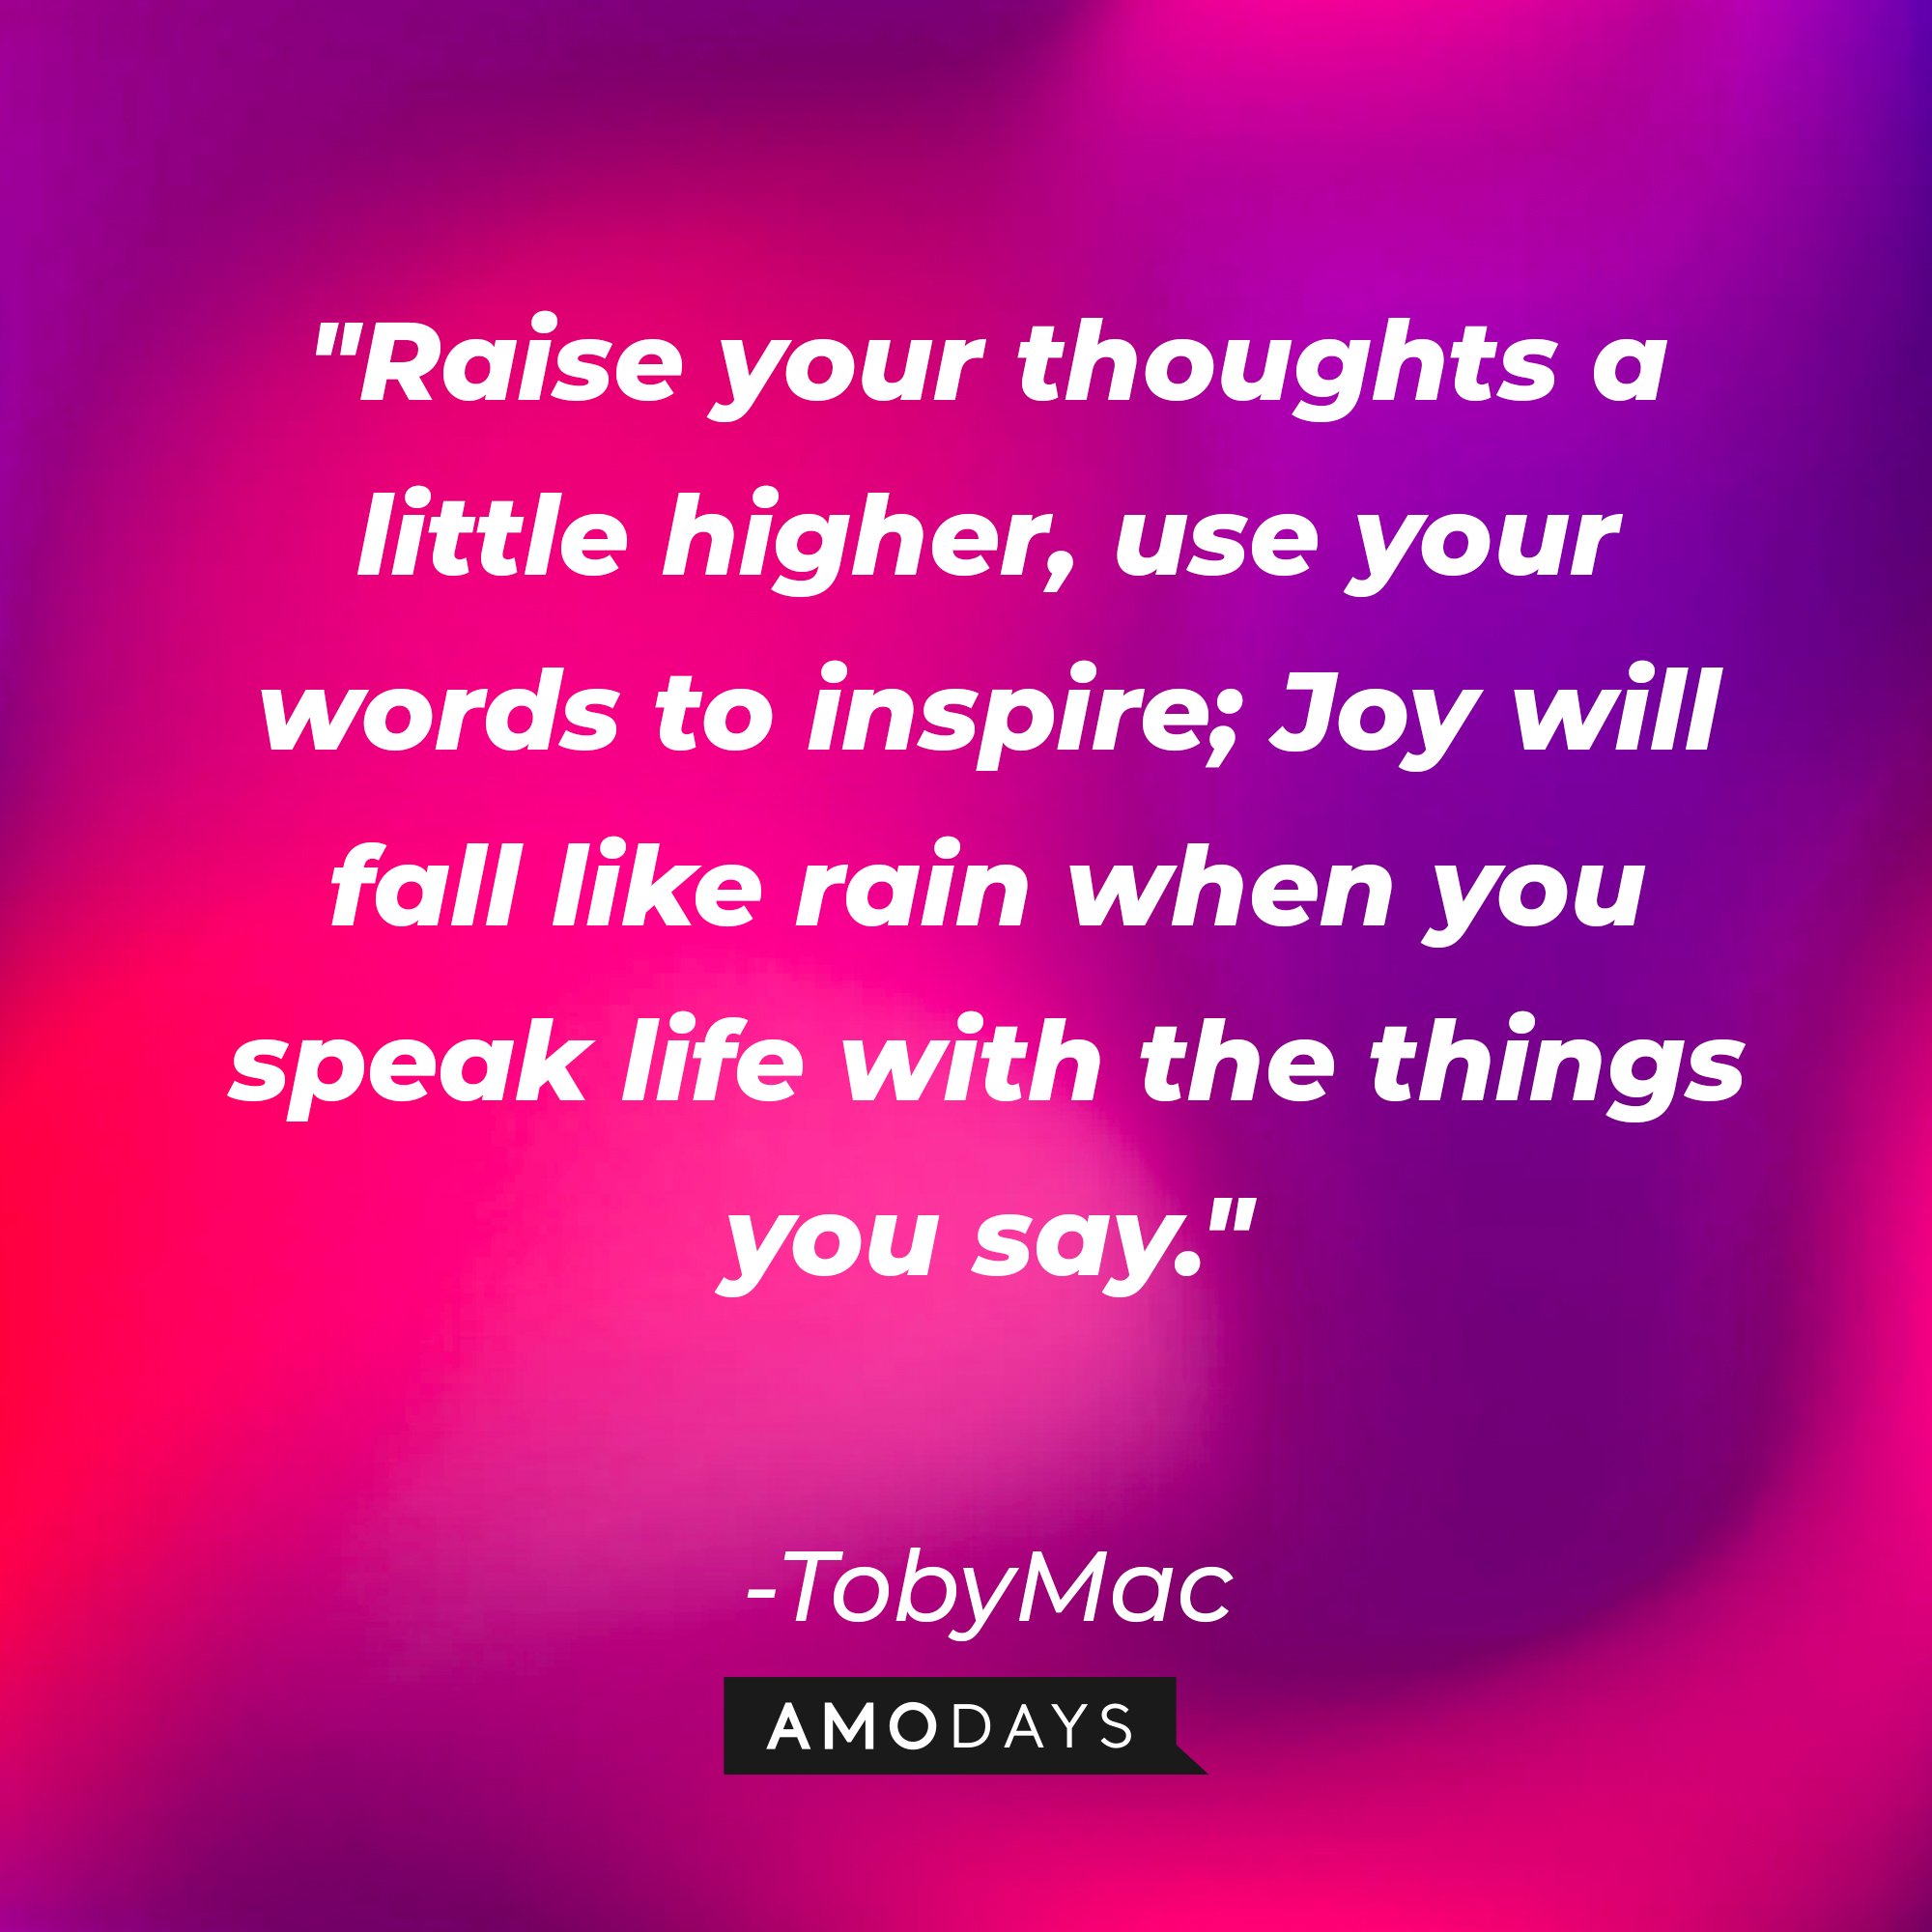 TobyMac's quote: "Raise your thoughts a little higher, use your words to inspire; Joy will fall like rain when you speak life with the things you say." | Image: AmoDays